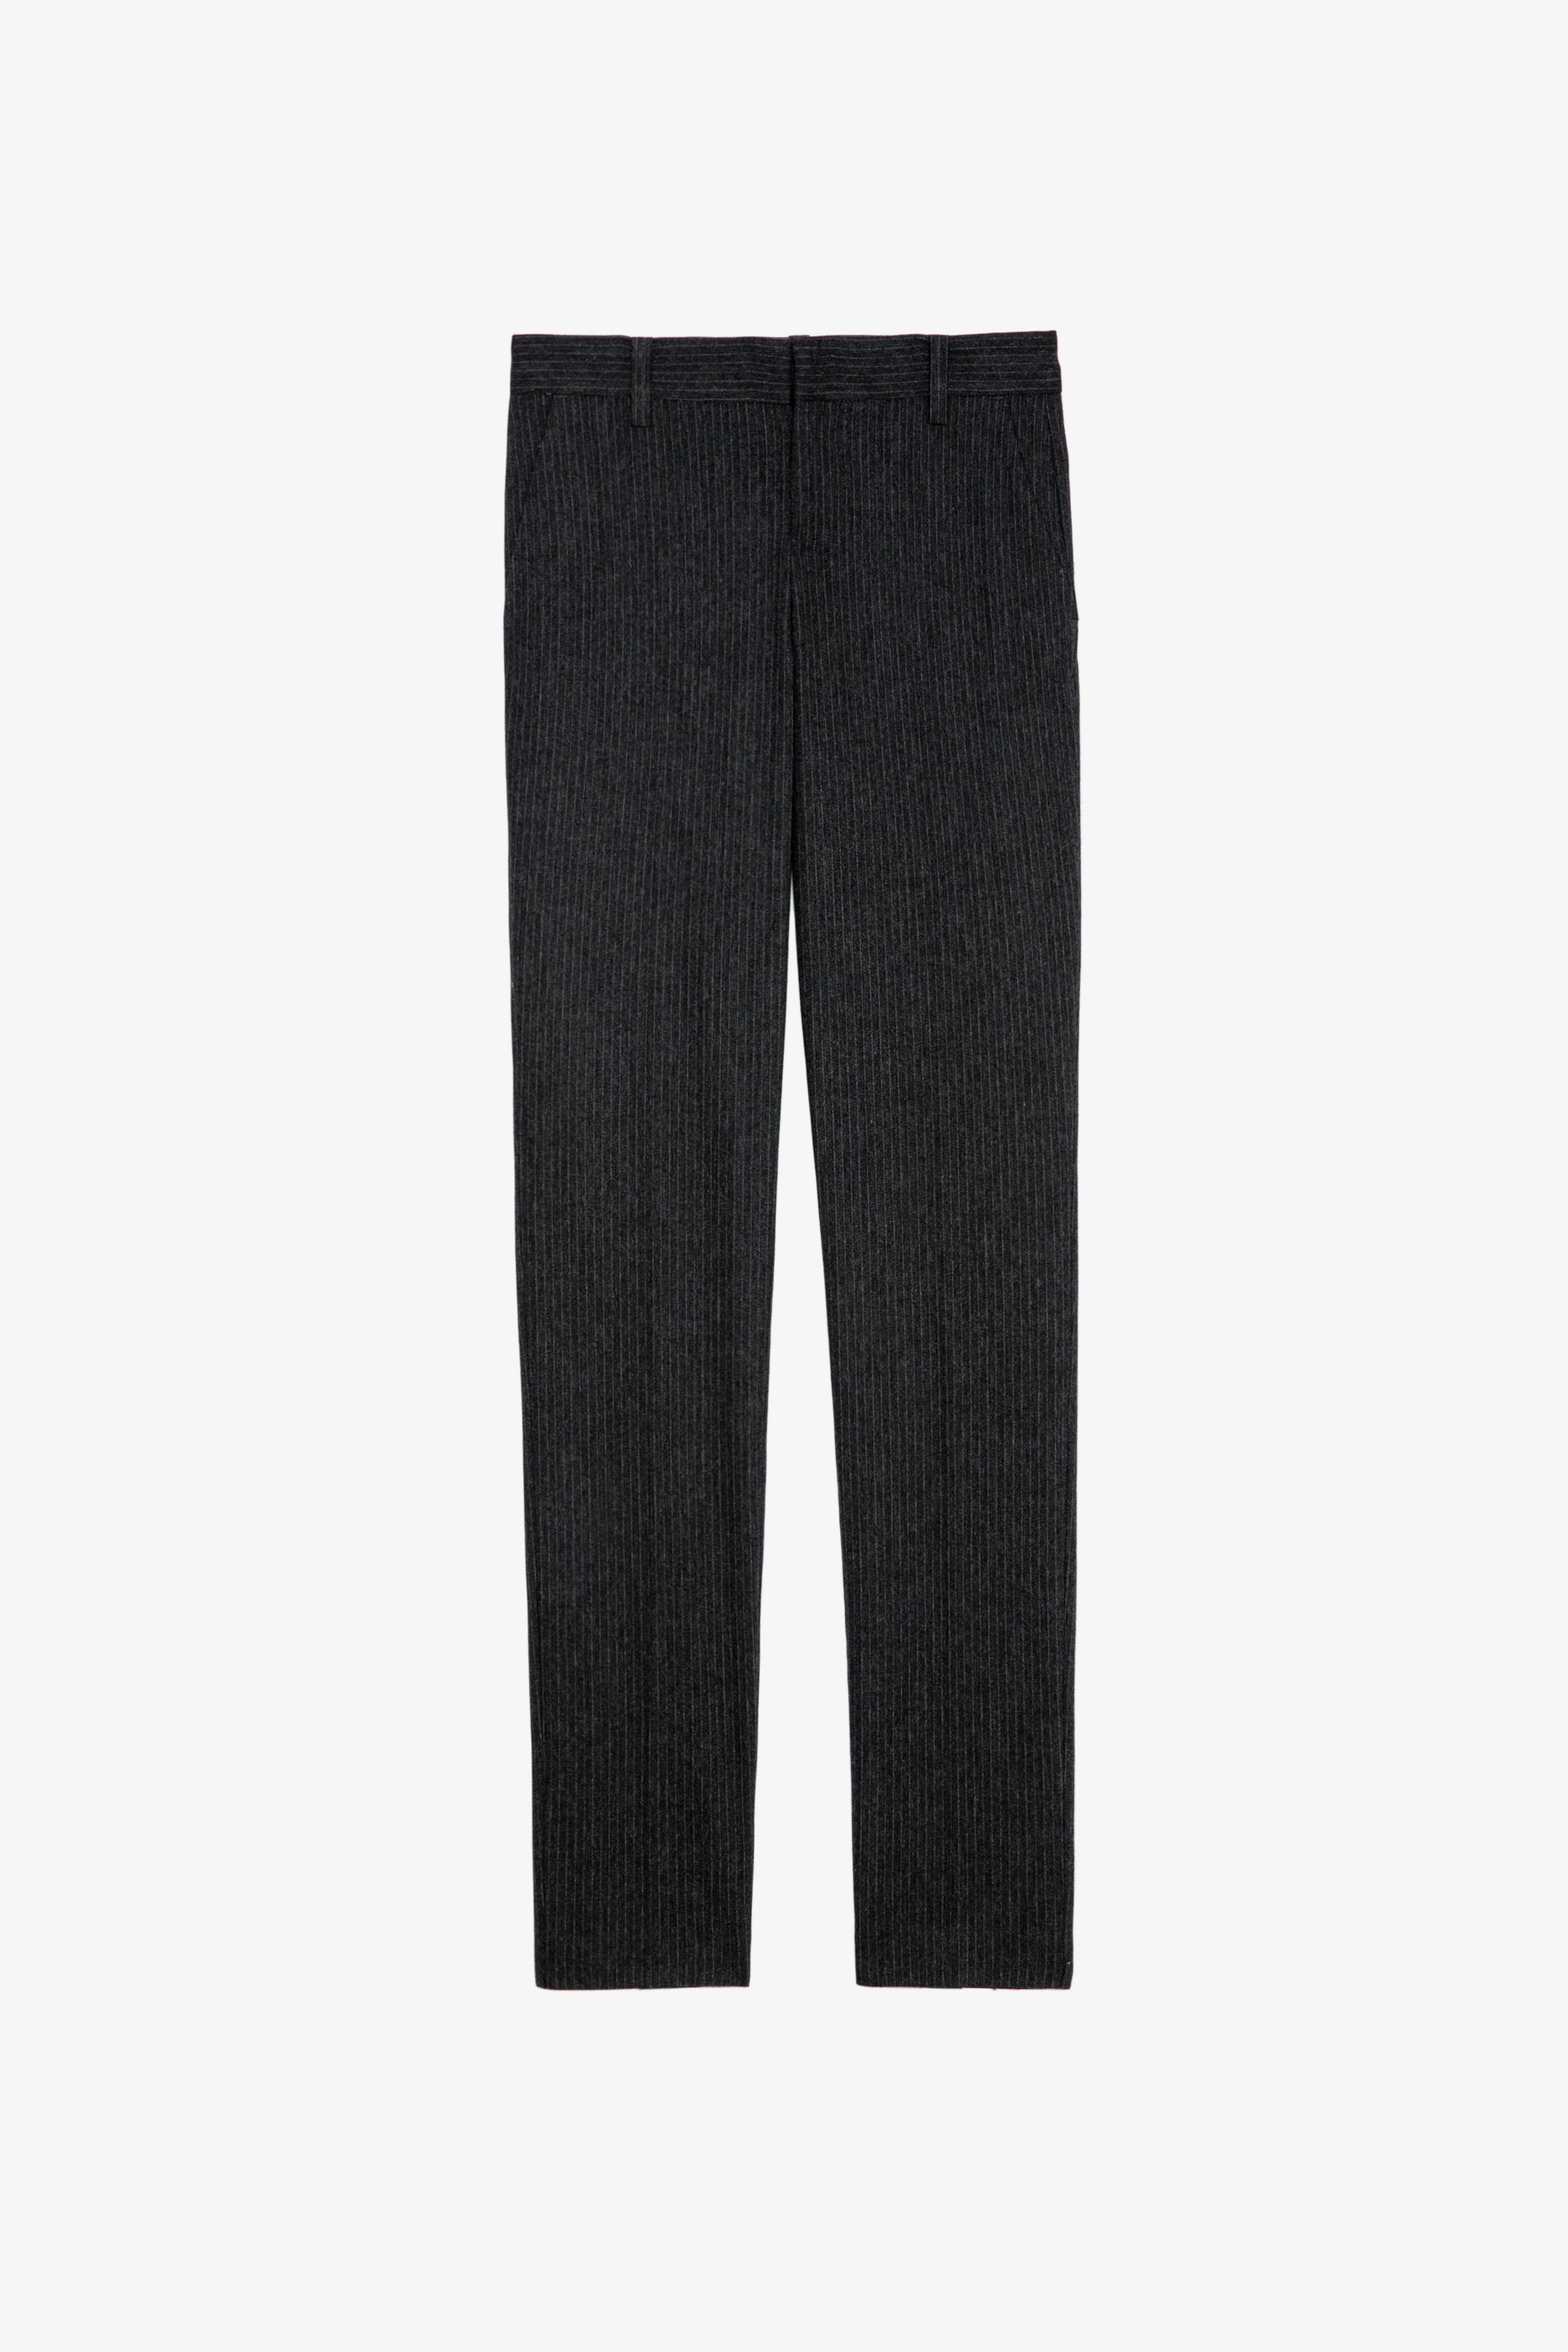 Prune Trousers Women’s charcoal striped suit trousers